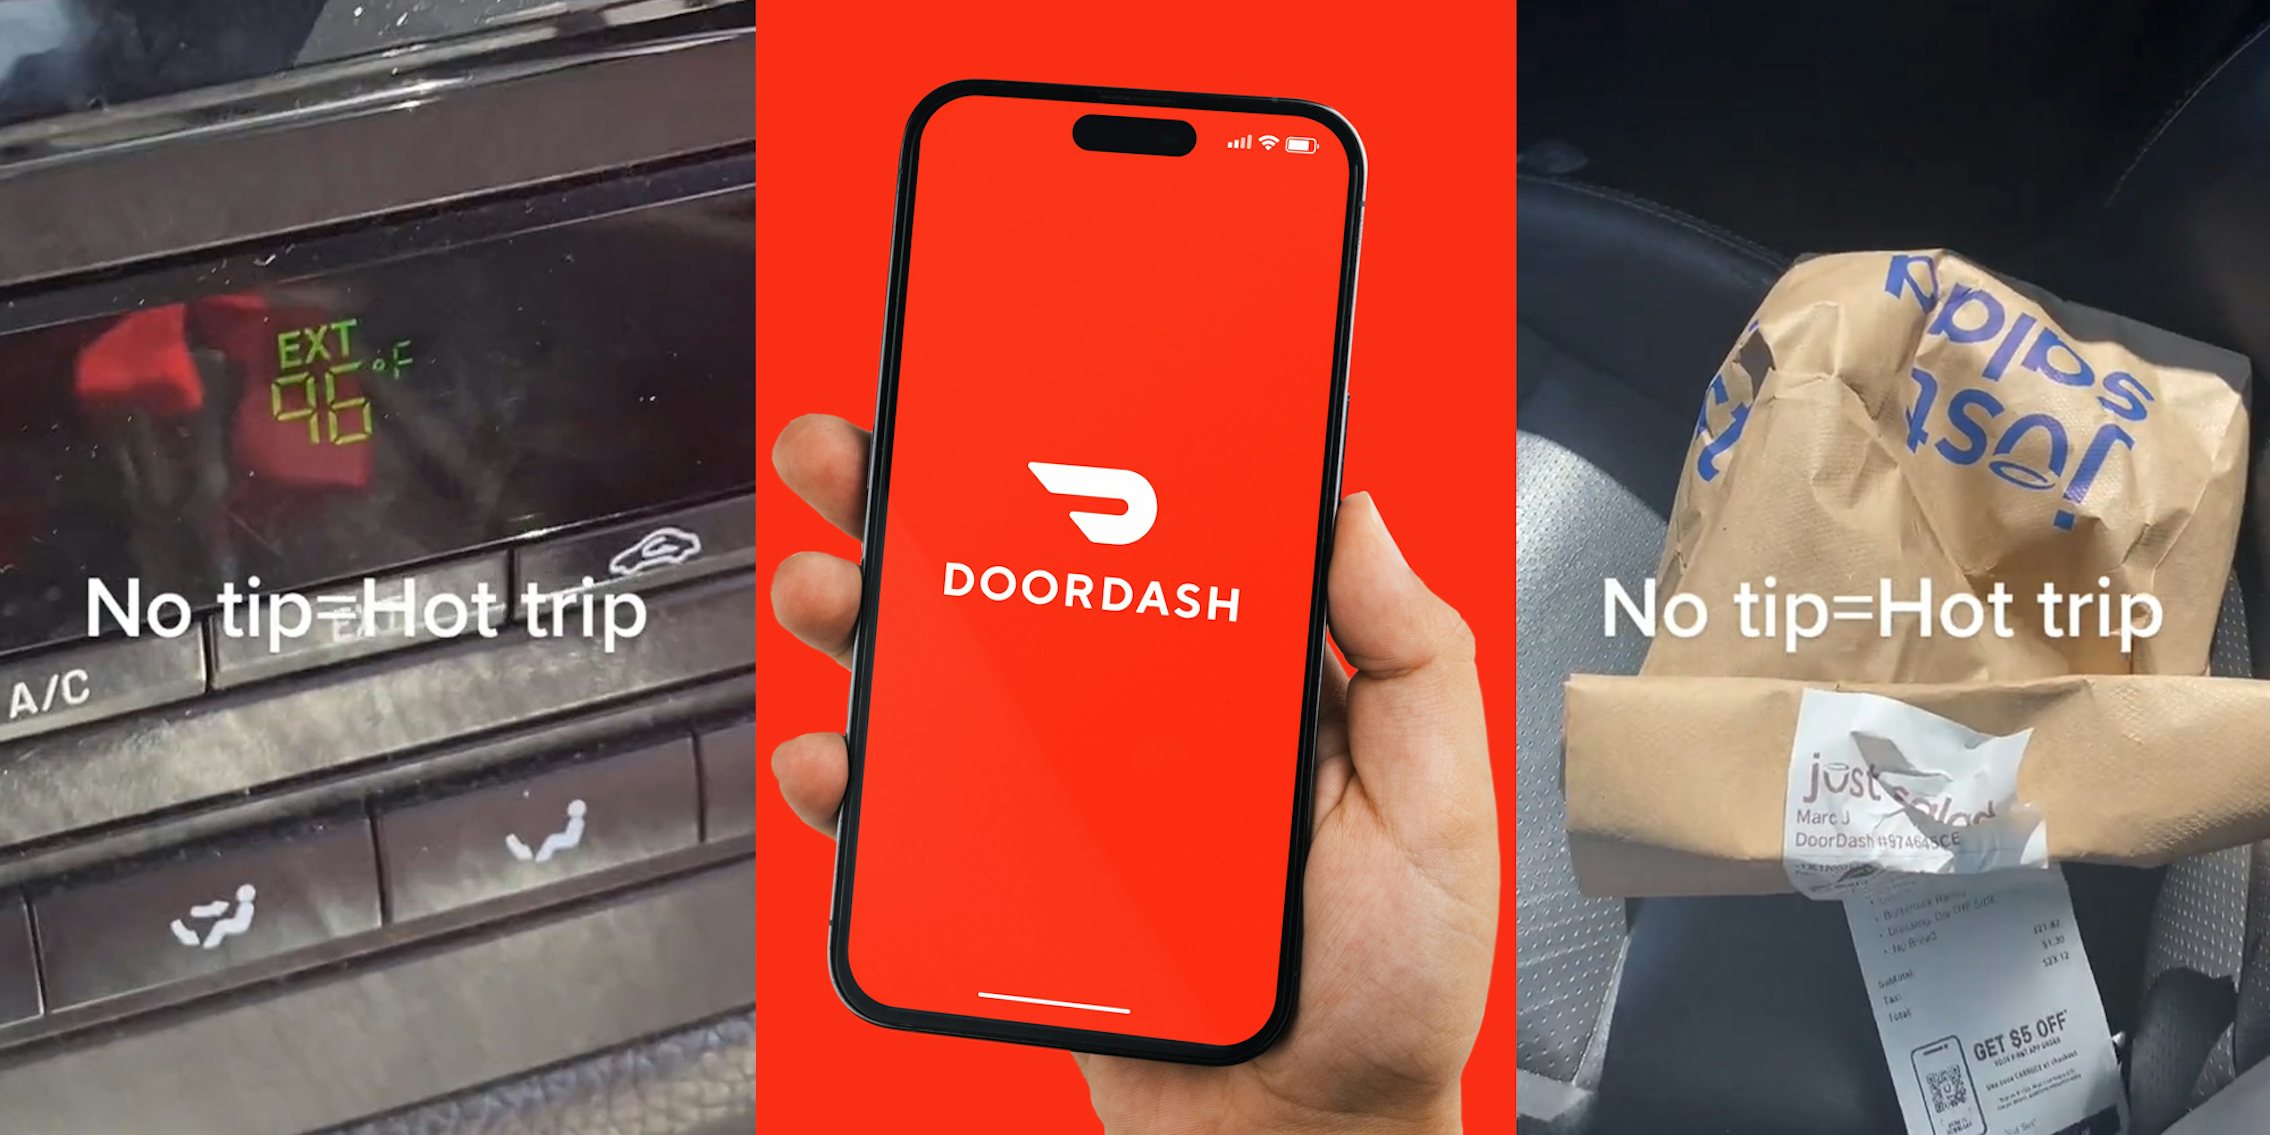 car temperature reading 96F with caption 'No tip=Hot trip' (l) hand holding phone with DoorDash on screen in front of red background (c) salad DoorDash delivery in car with caption 'No tip=Hot trip' (r)